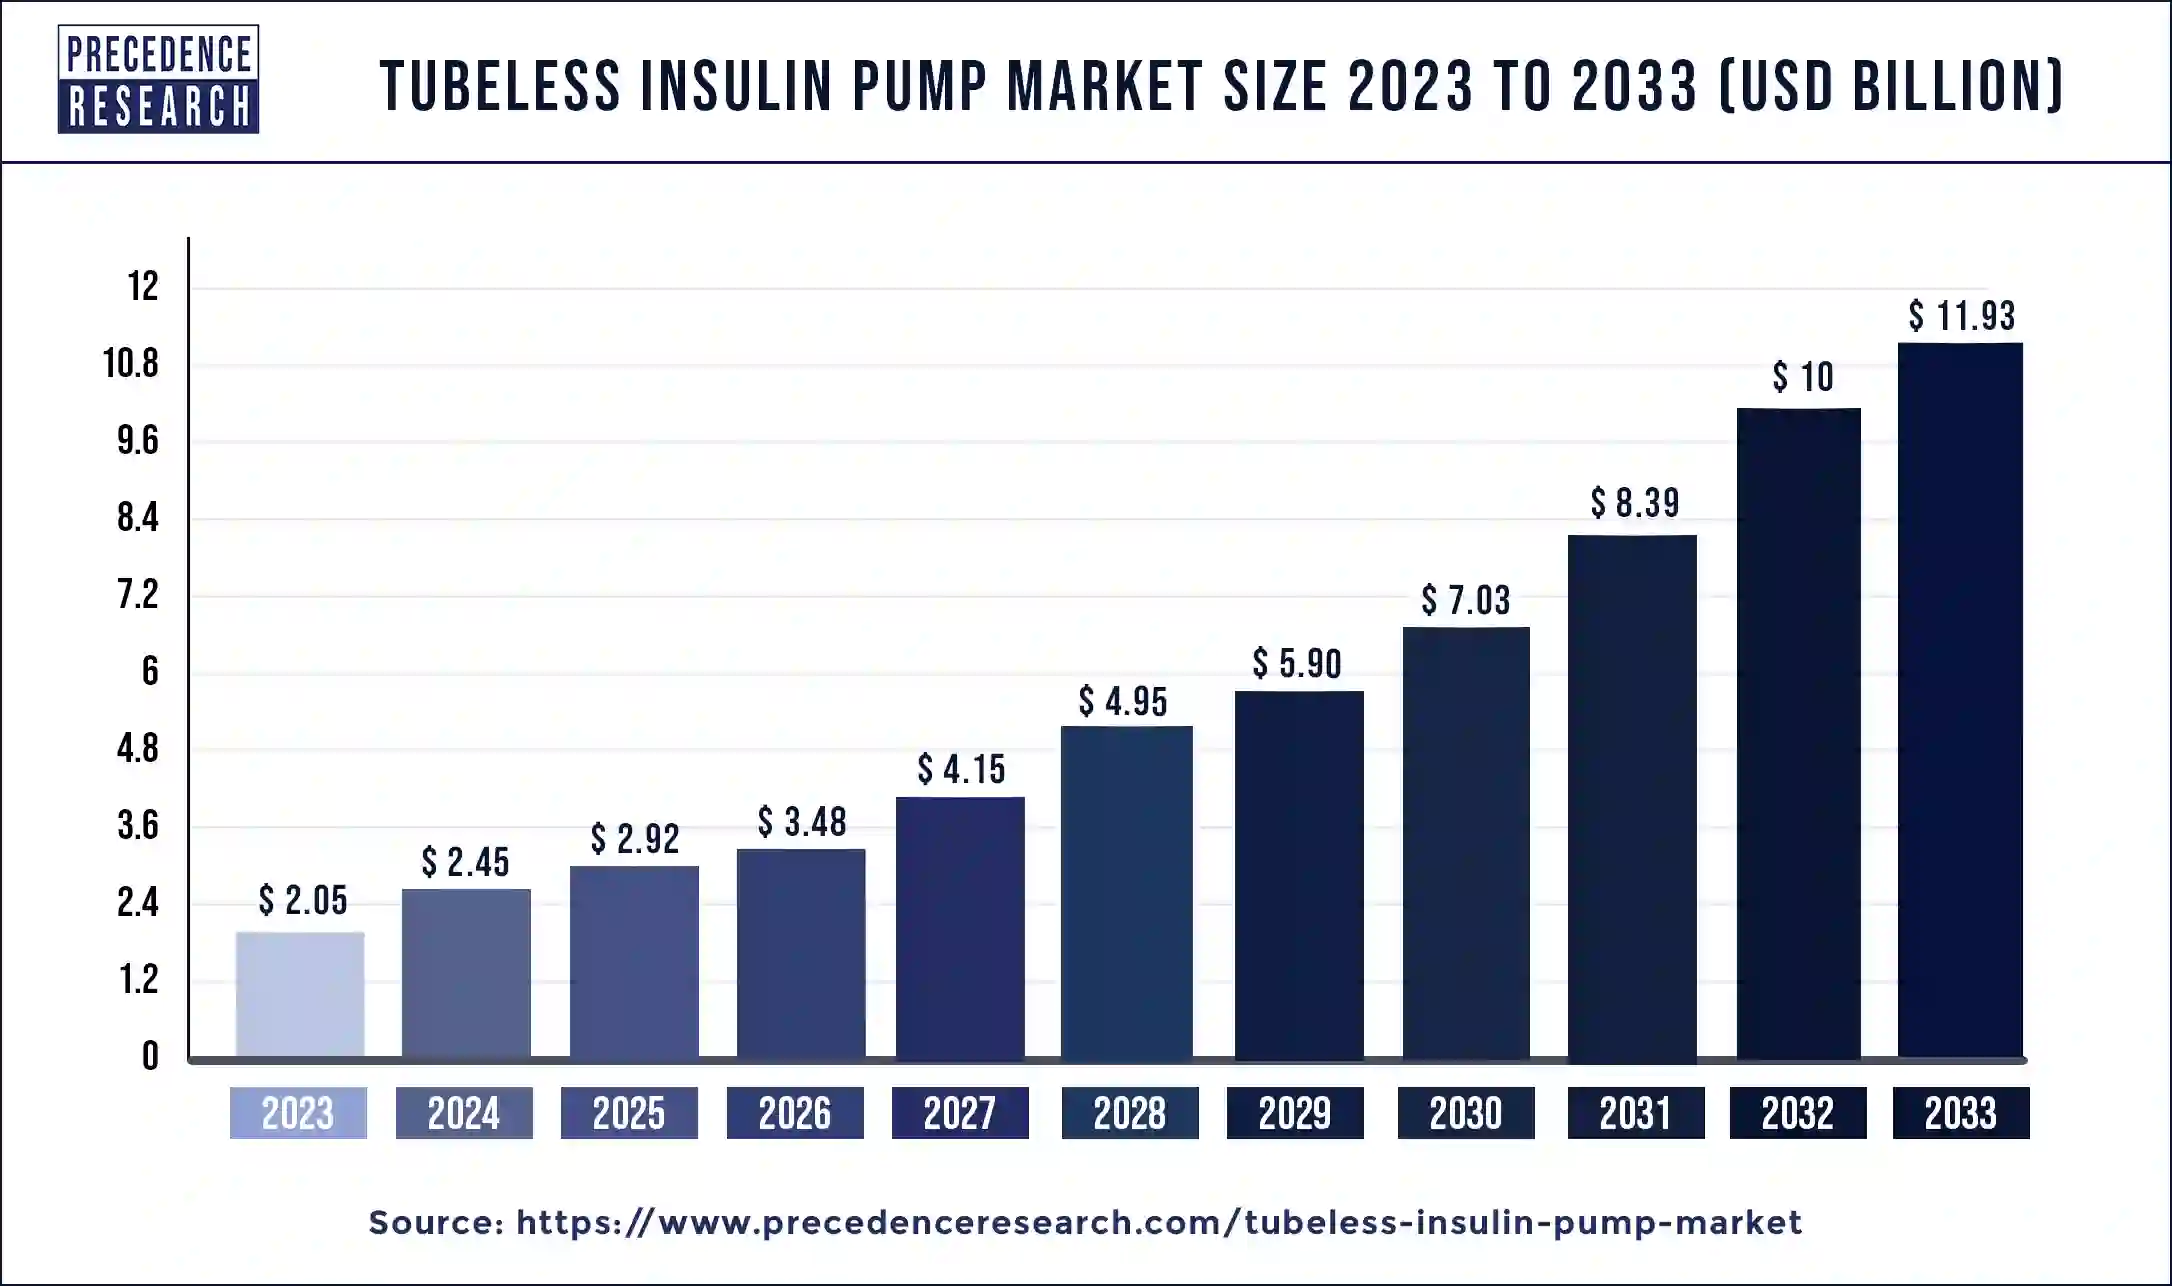 Tubeless Insulin Pump Market Size 2024 to 2033